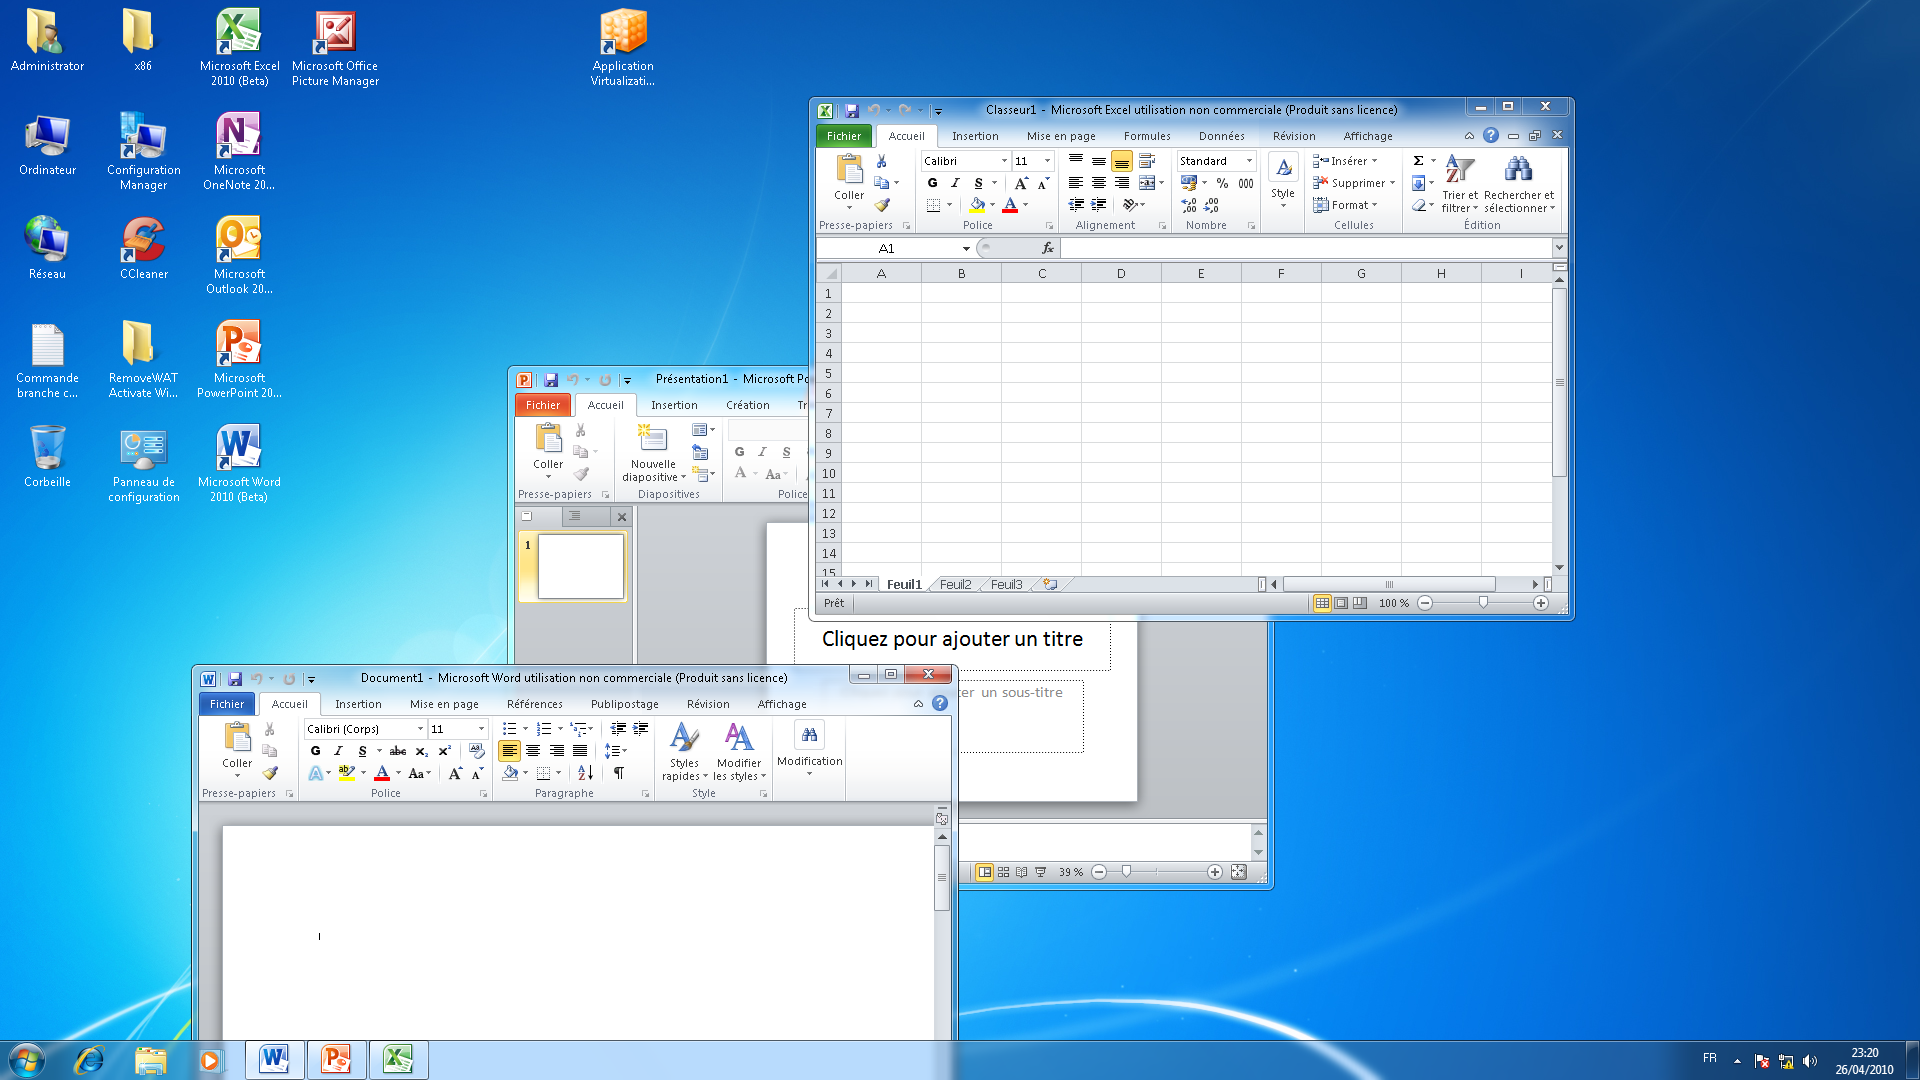 microsoft office free download version 2010